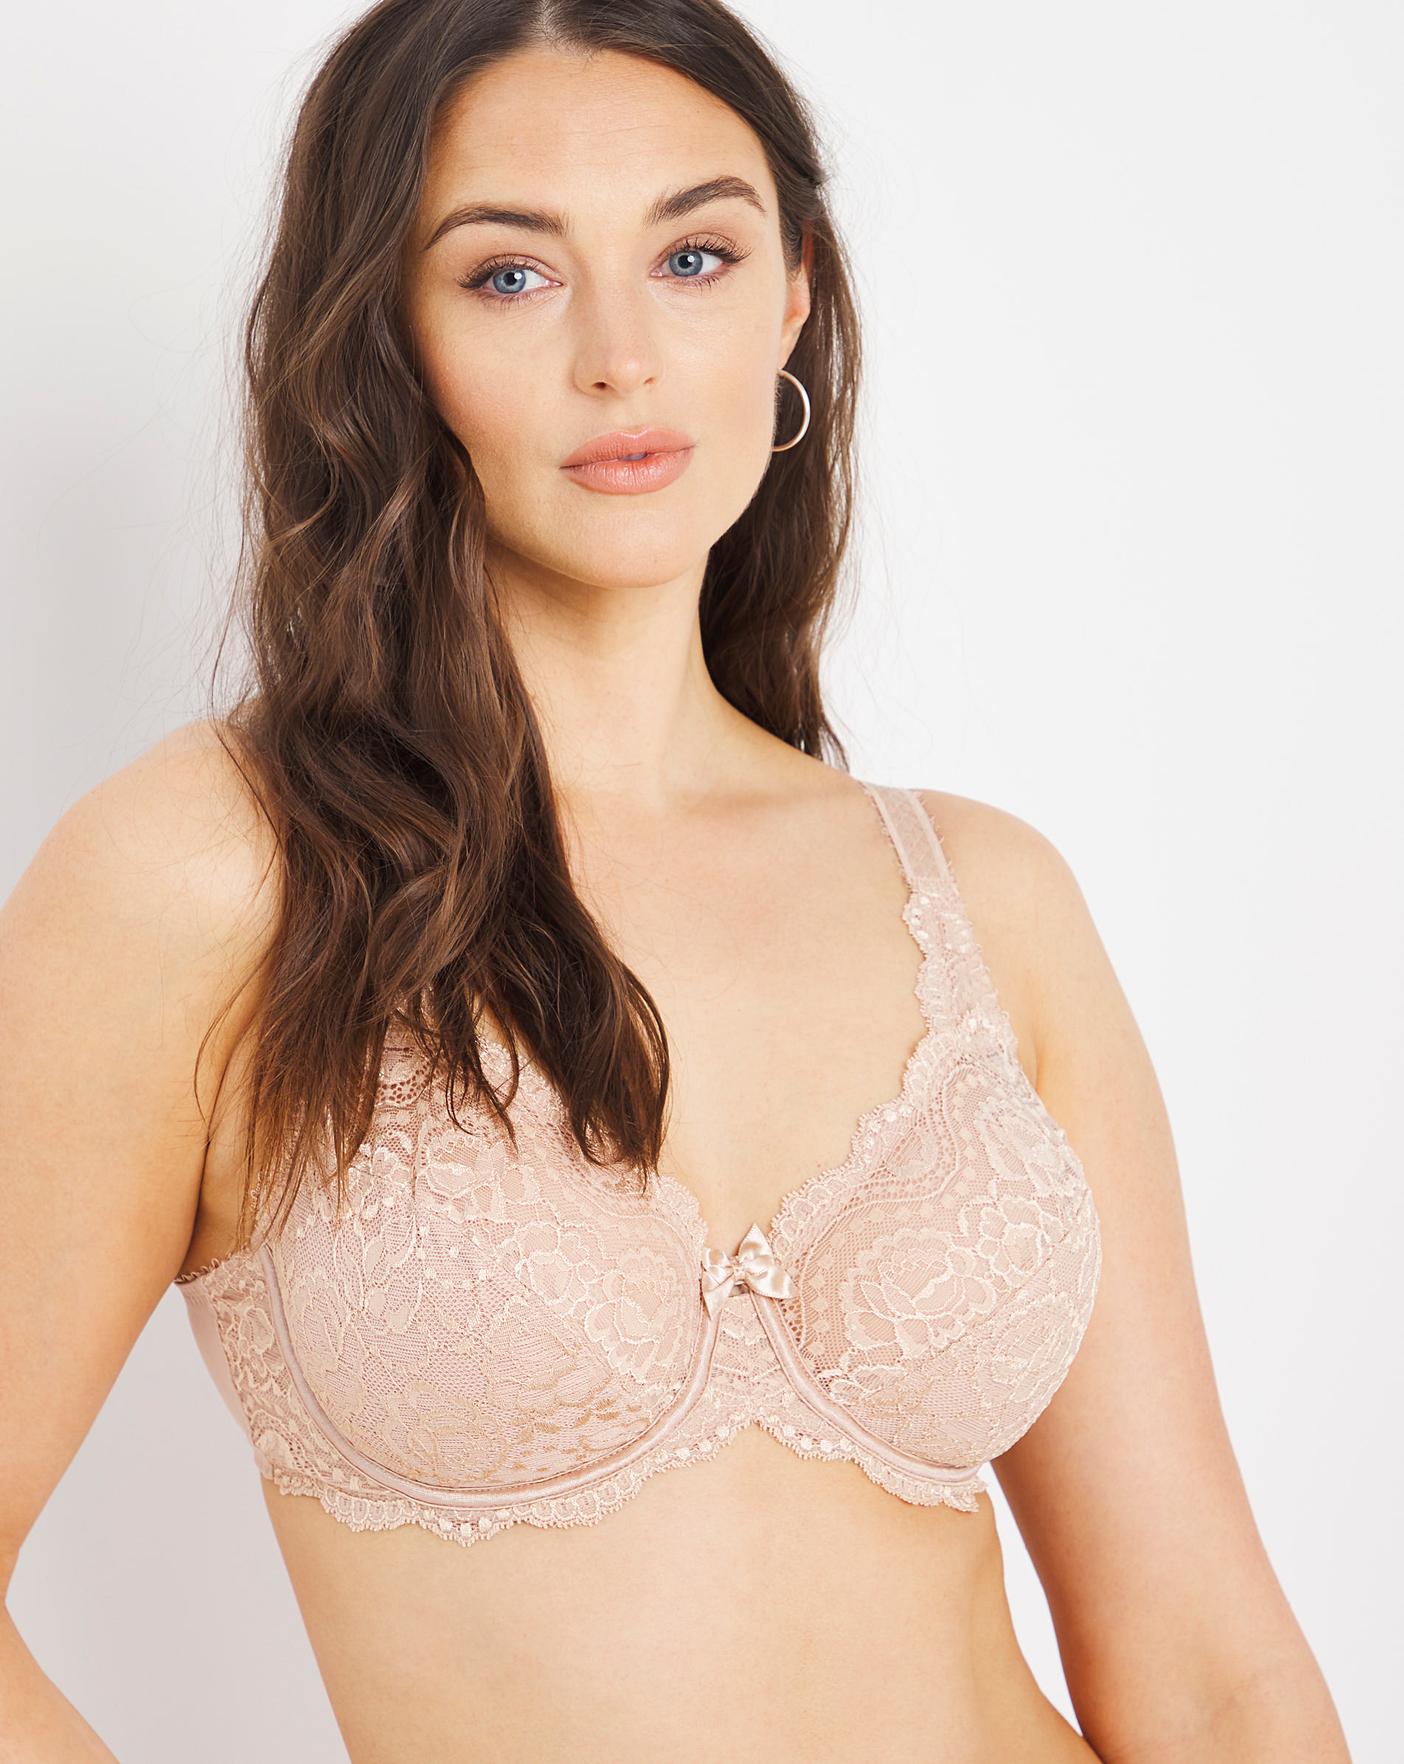 Playtex Flower Lace Full Cup Bra Nude